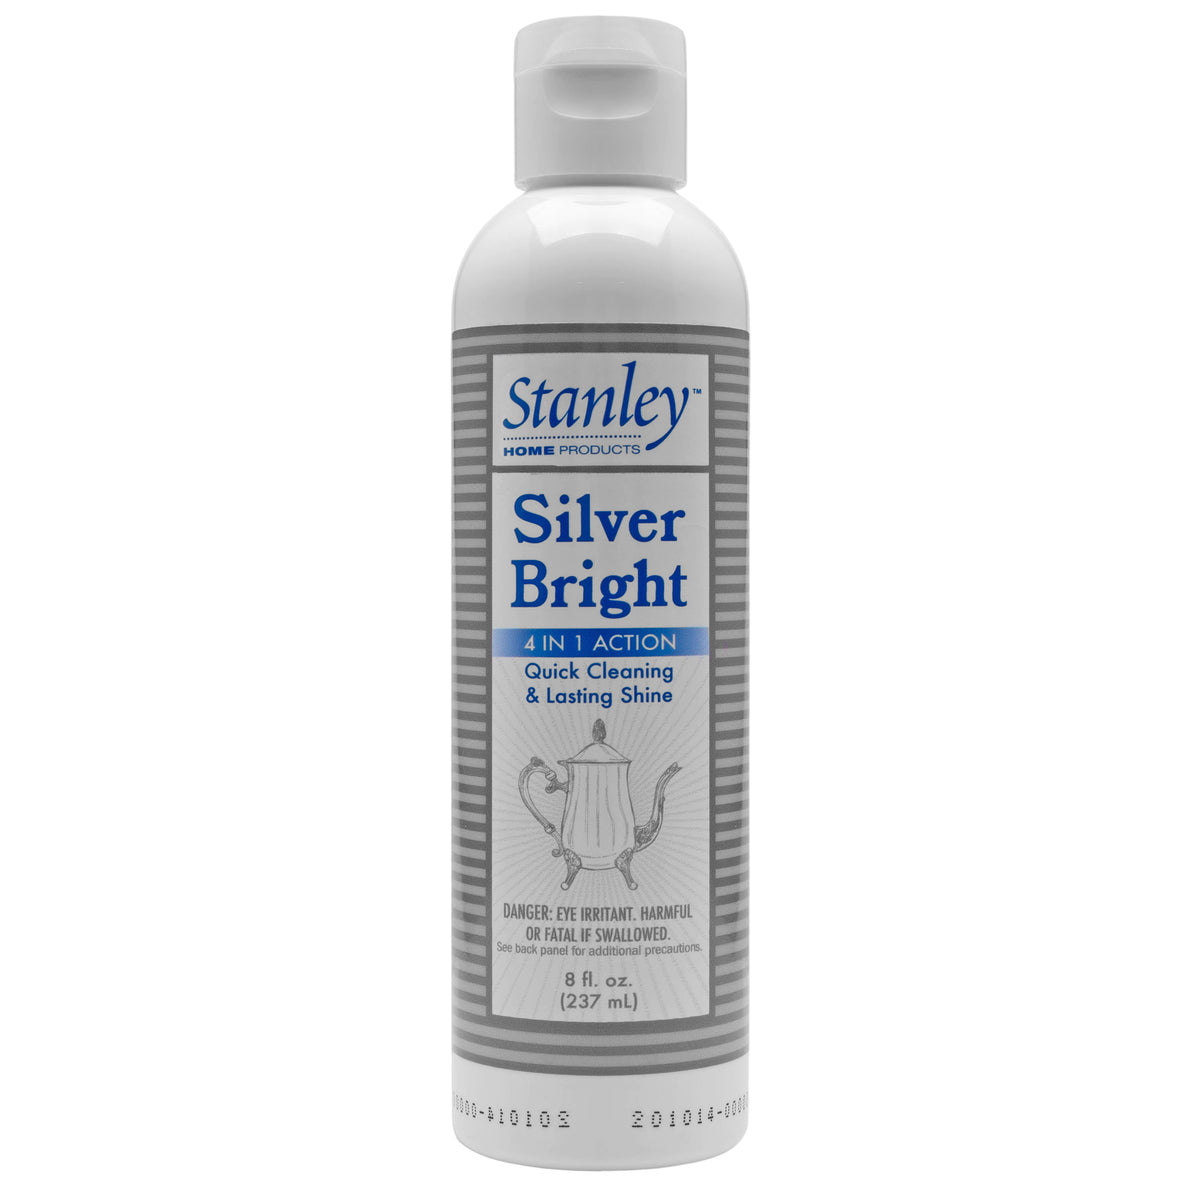 Brilliant Silver Cleaning Solution 8 oz Removes Grime and Tarnish